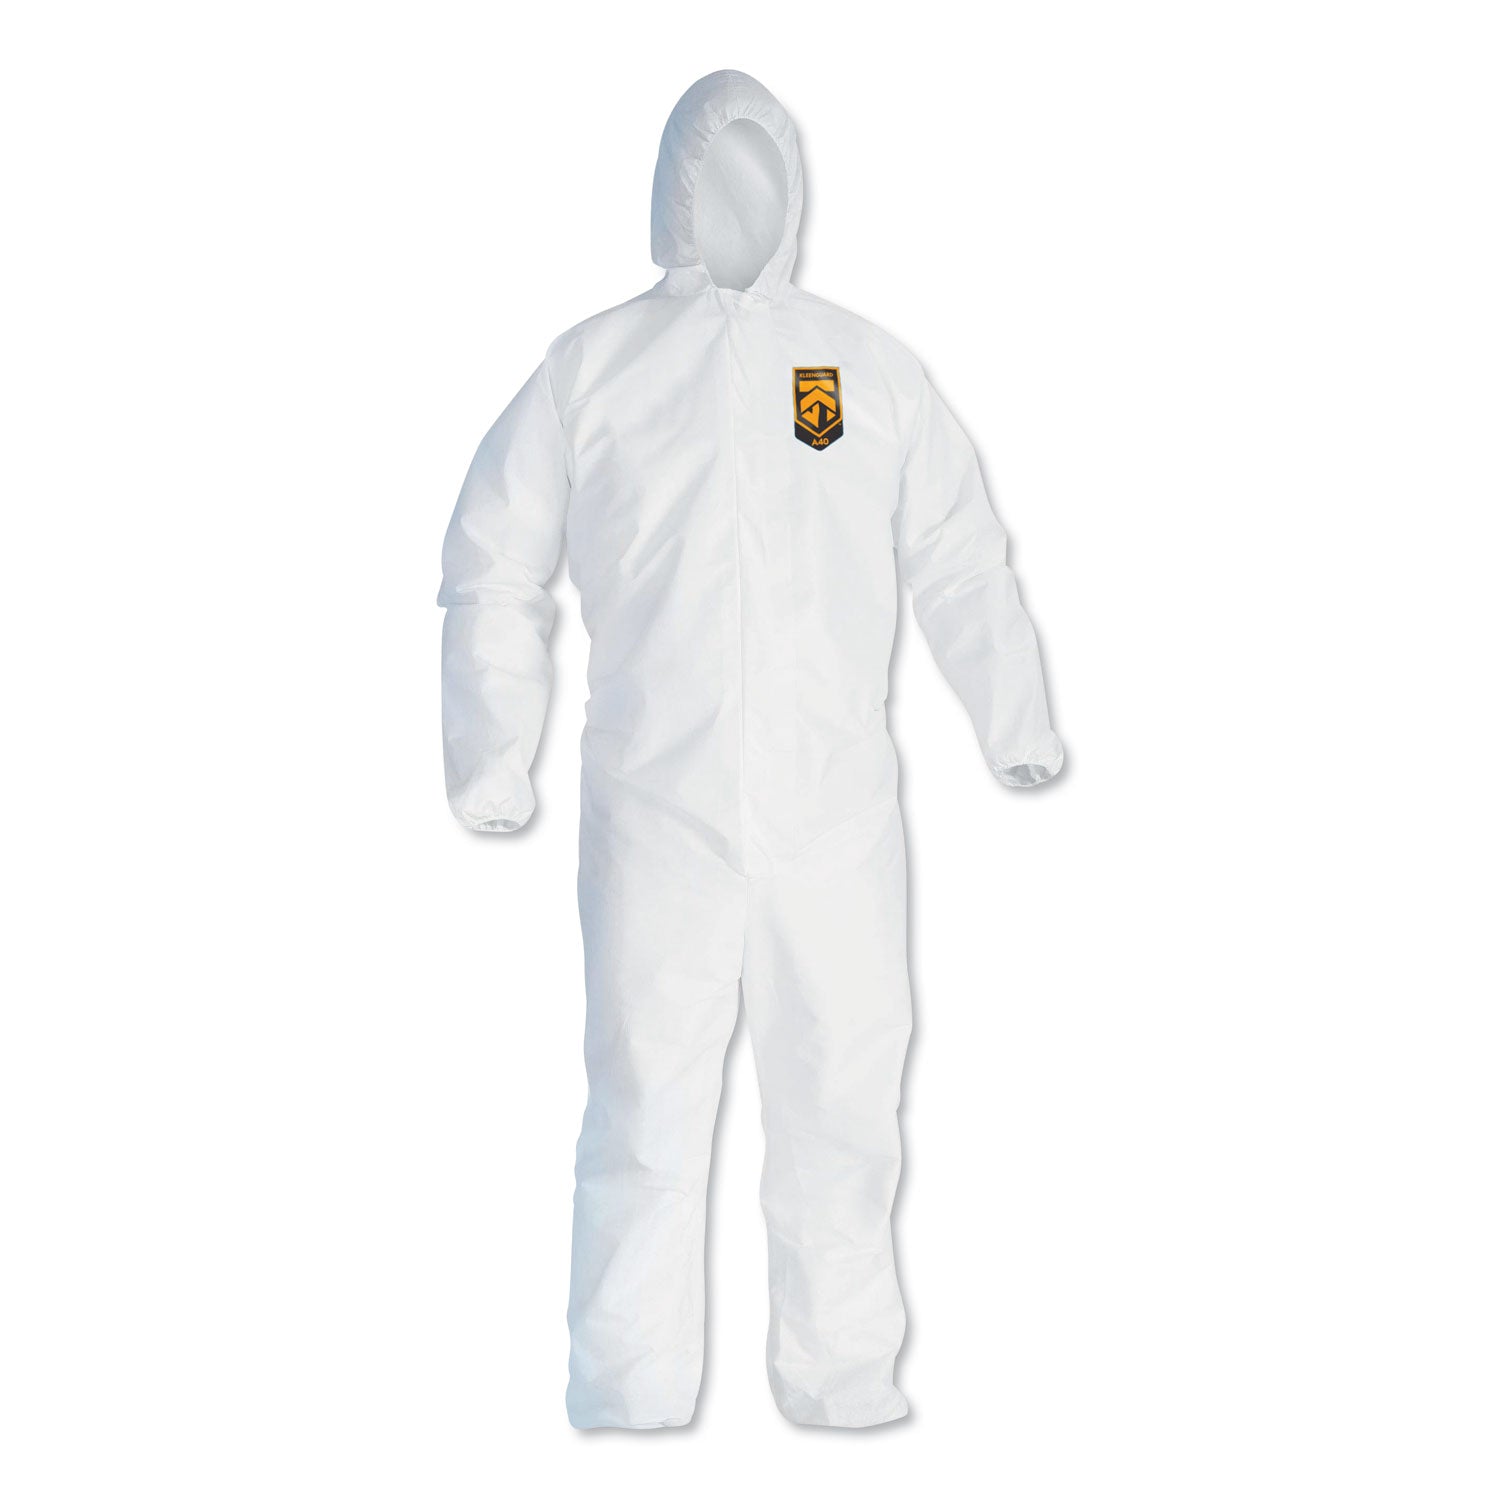 a40-elastic-cuff-and-ankles-hooded-coveralls-2x-large-white-25-carton_kcc44325 - 1